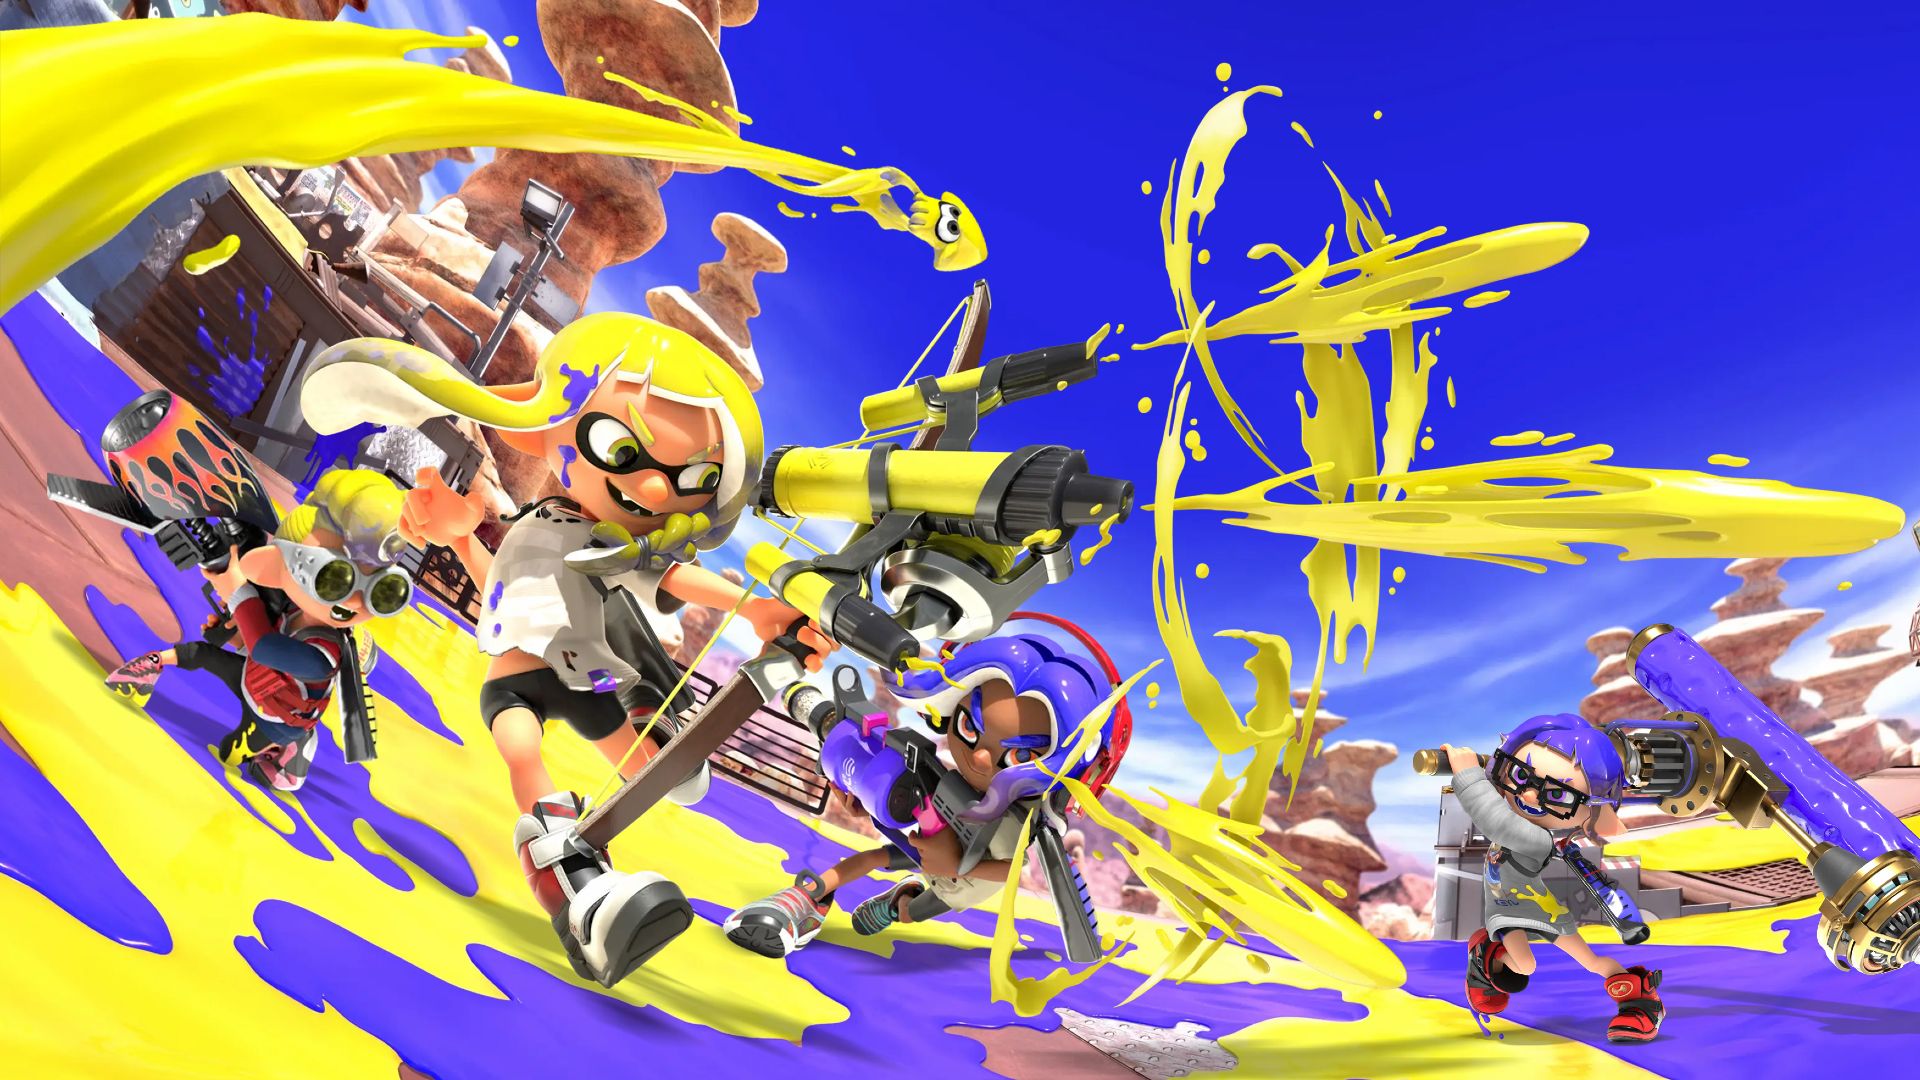 Best Multiplayer Games: Multiple Inklings can be seen